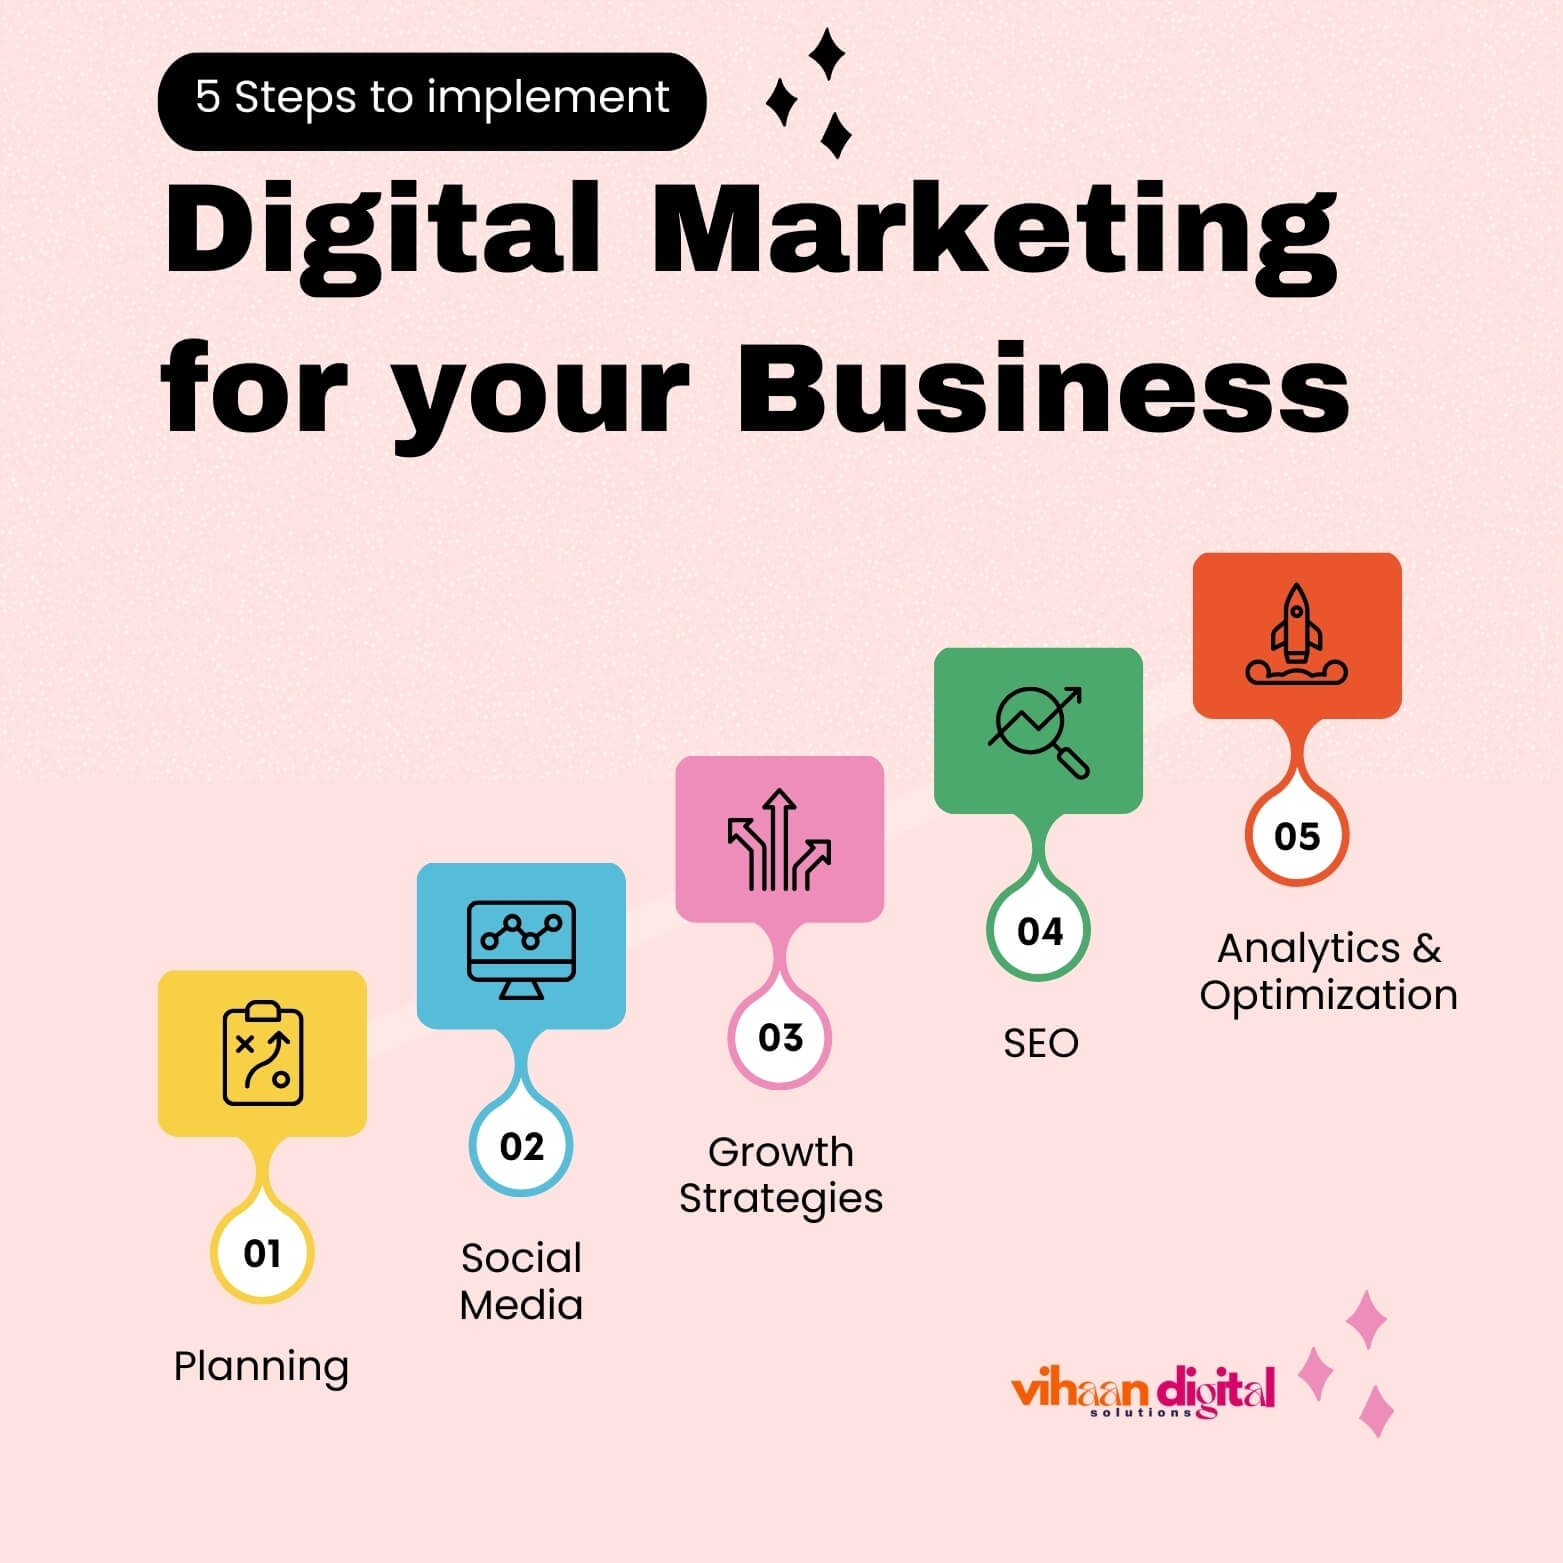 Steps to implement Digital Marketing for your Business